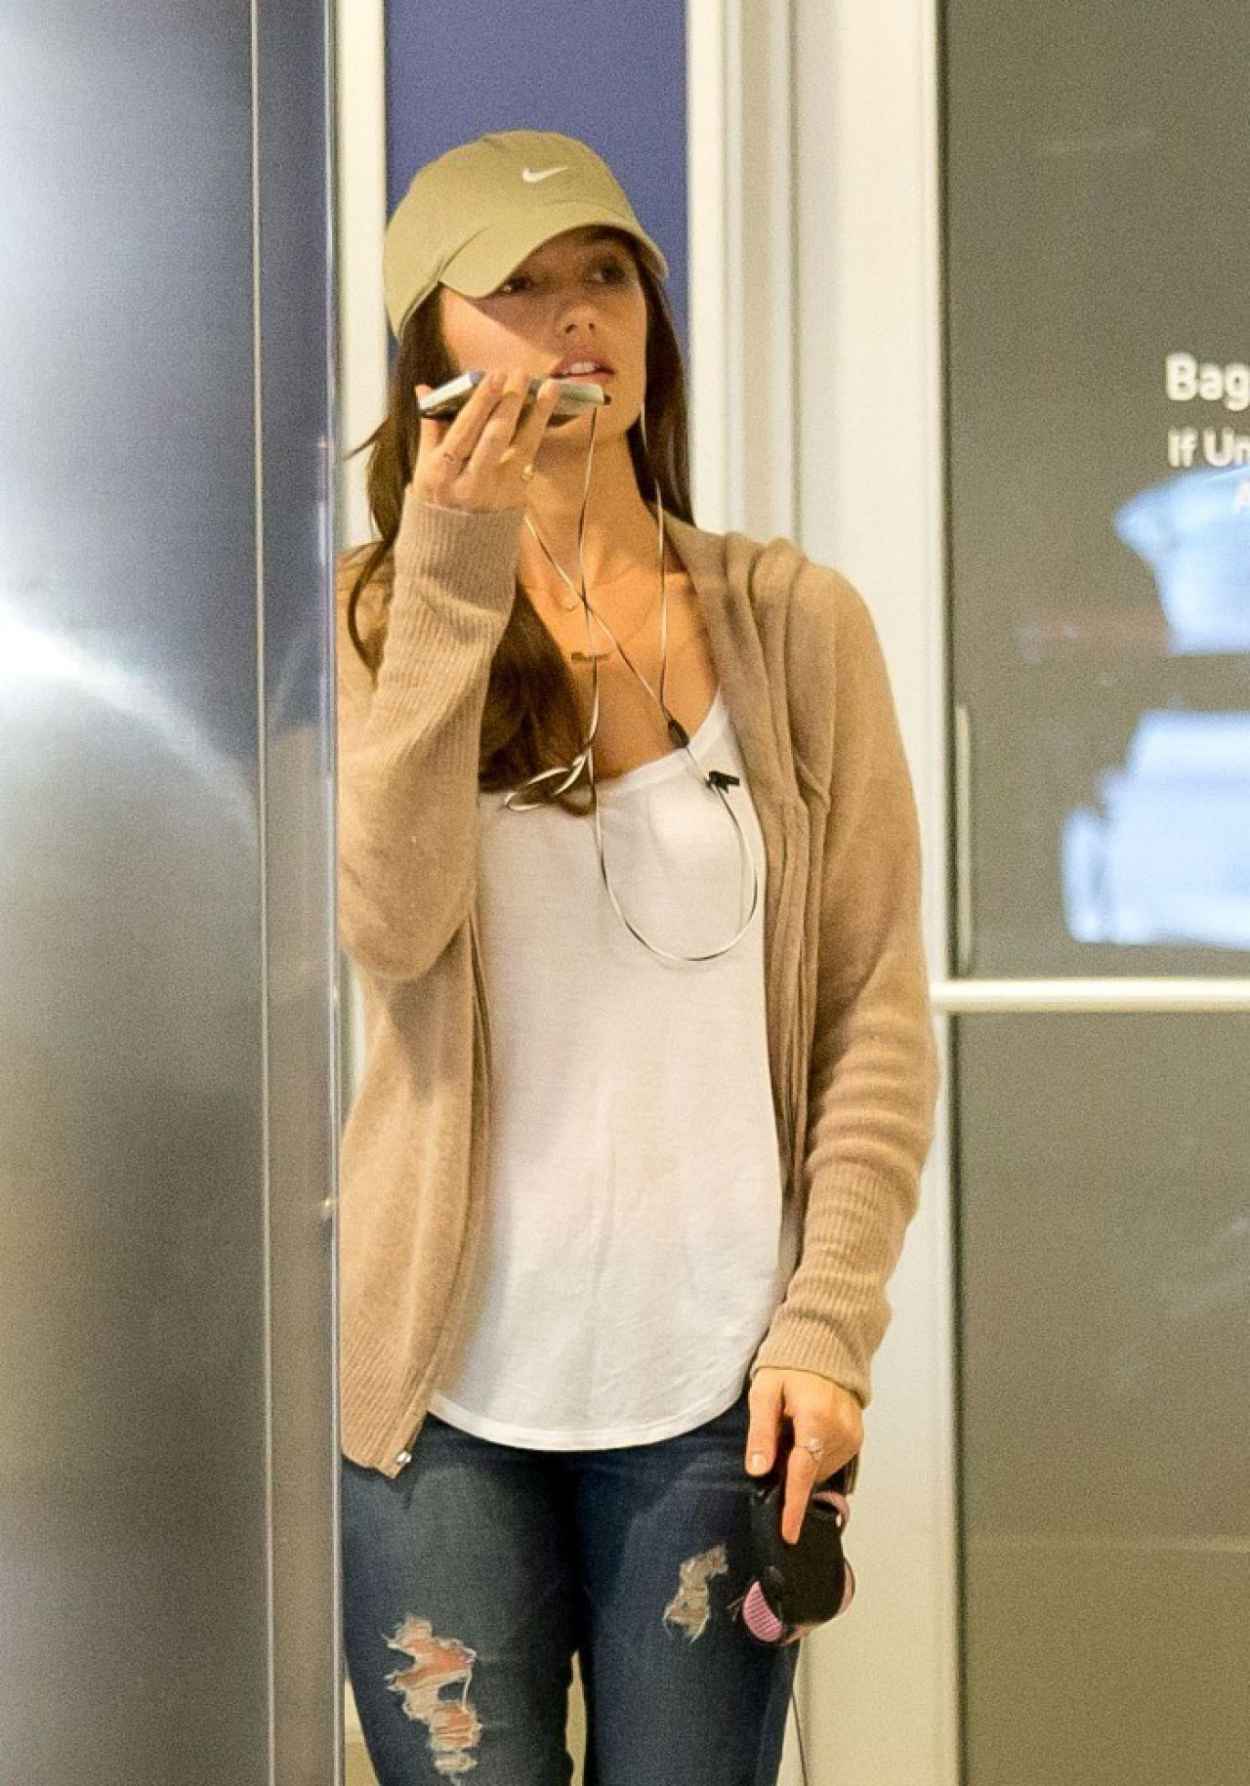 Minka Kelly Booty in Jeans at LAX Airport in Los Angeles-1